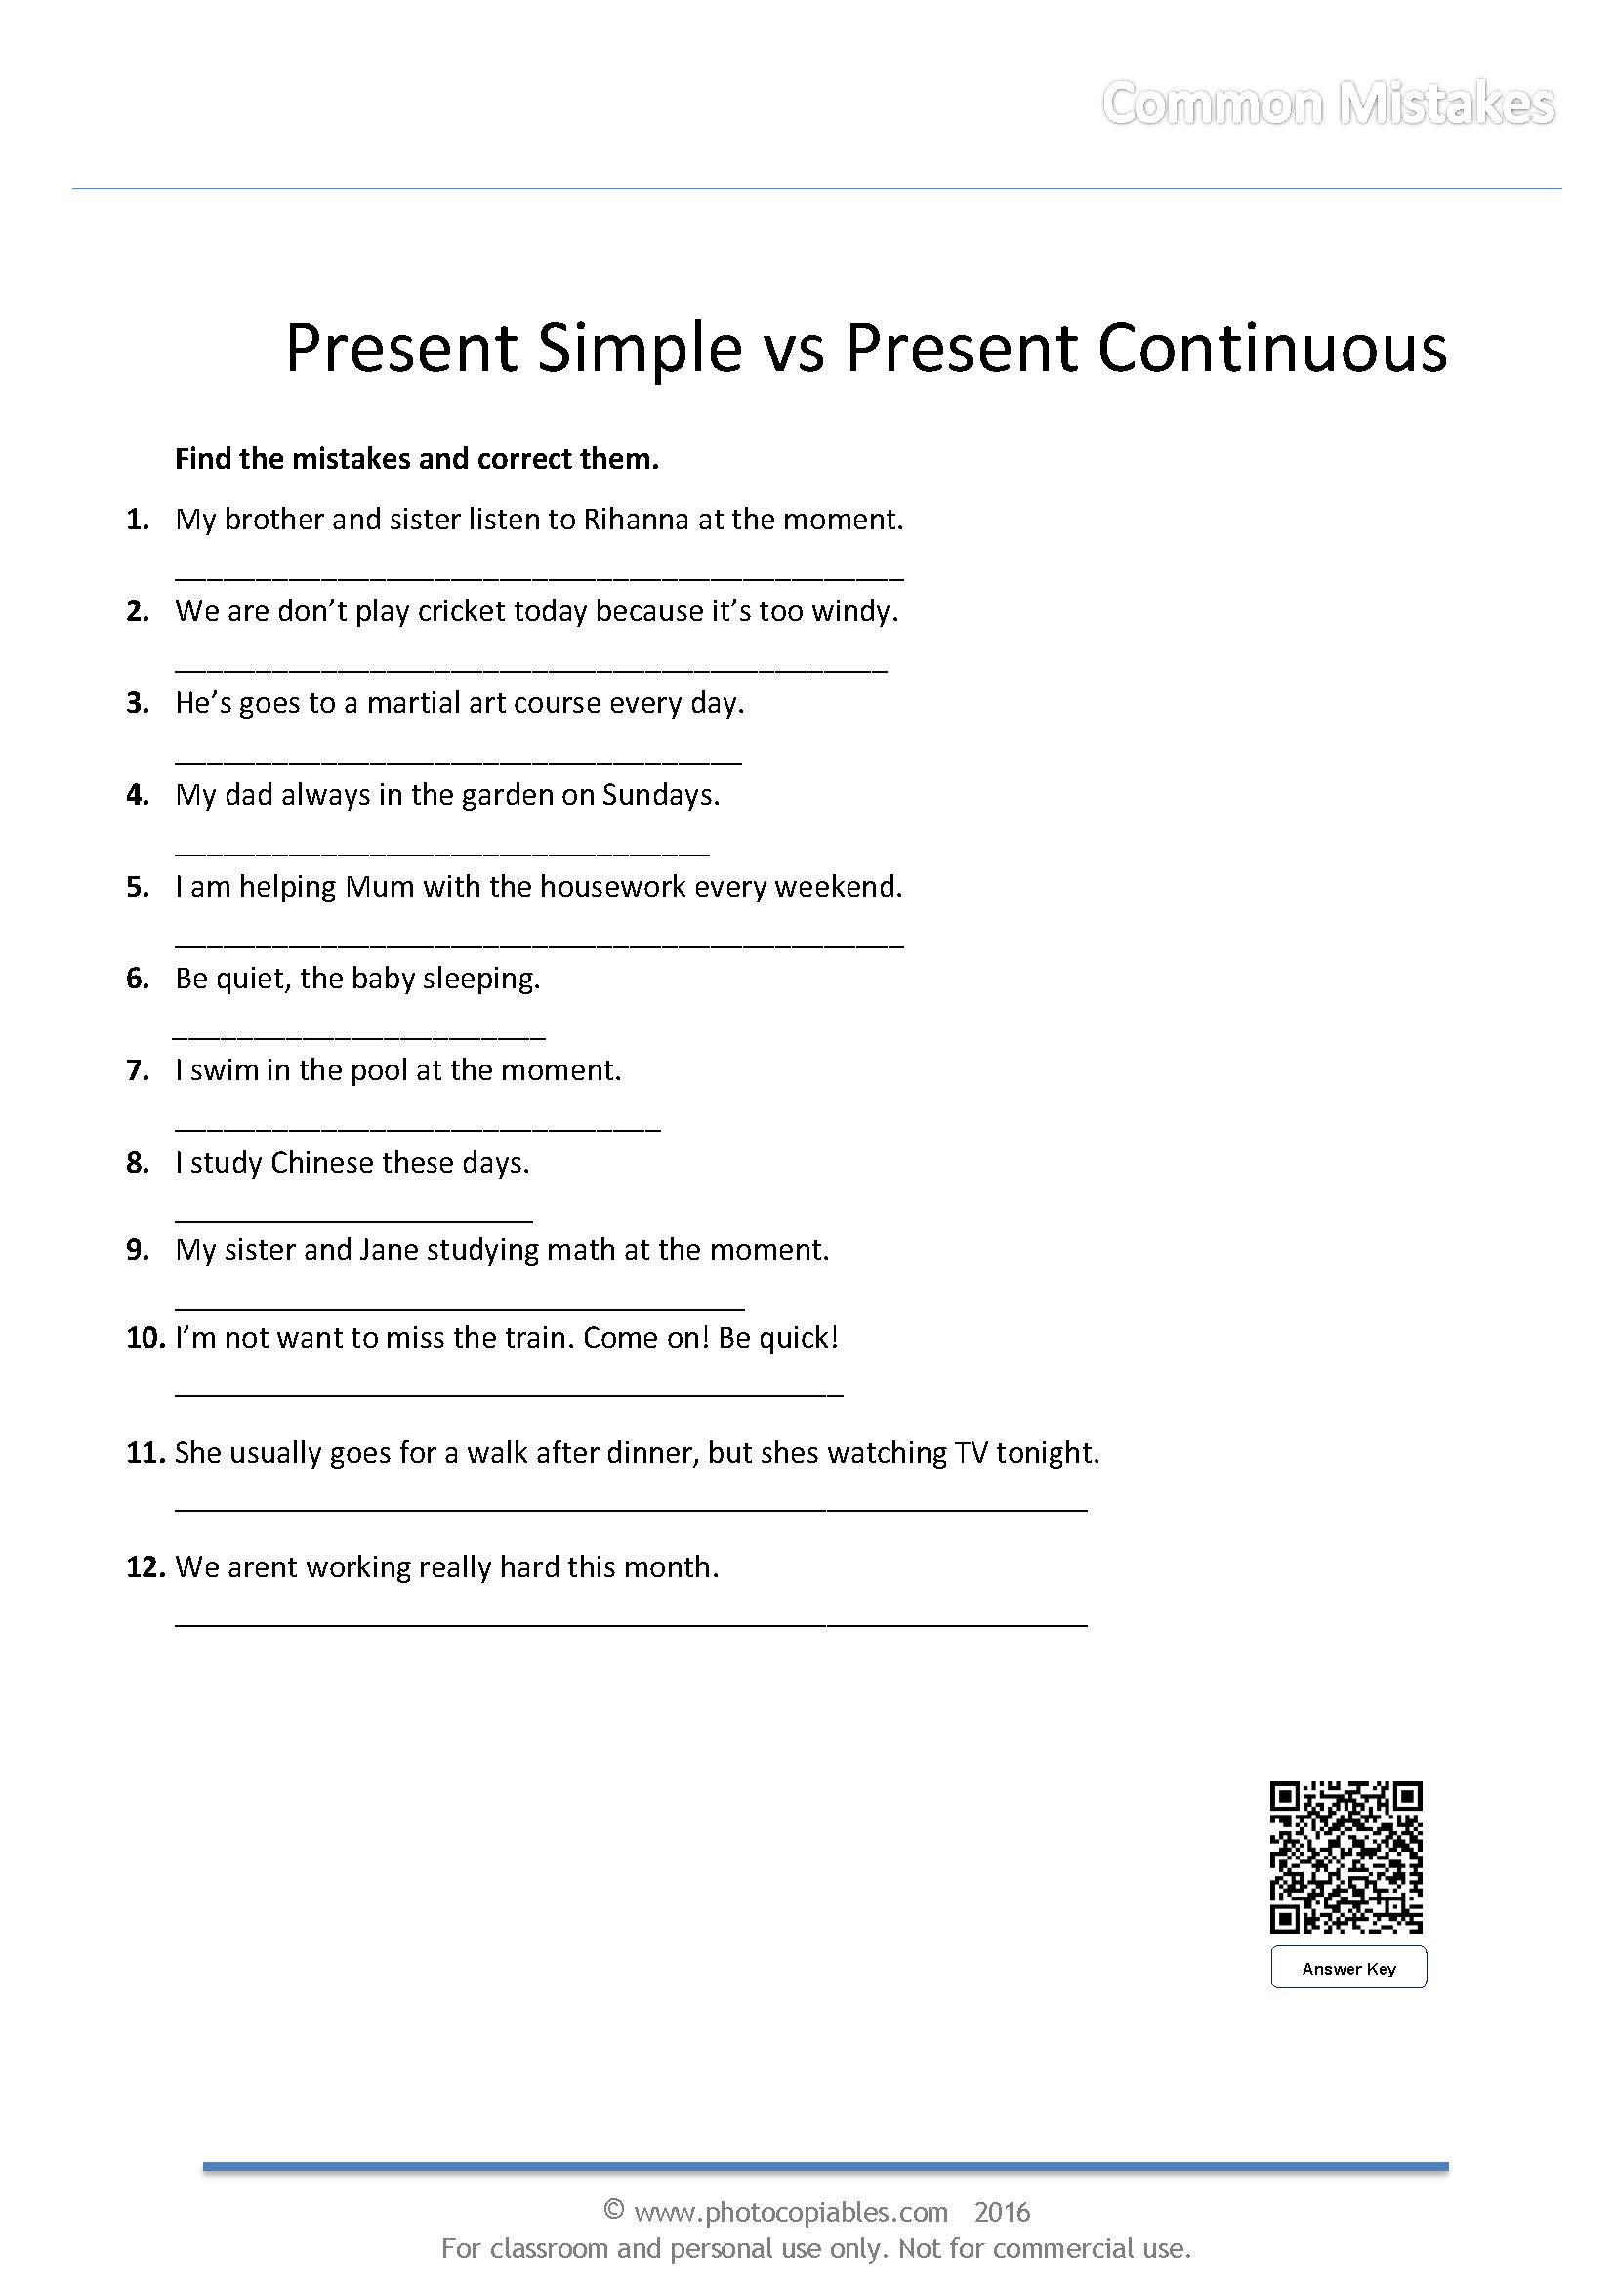 present-simple-vs-present-continuous-interactive-worksheet